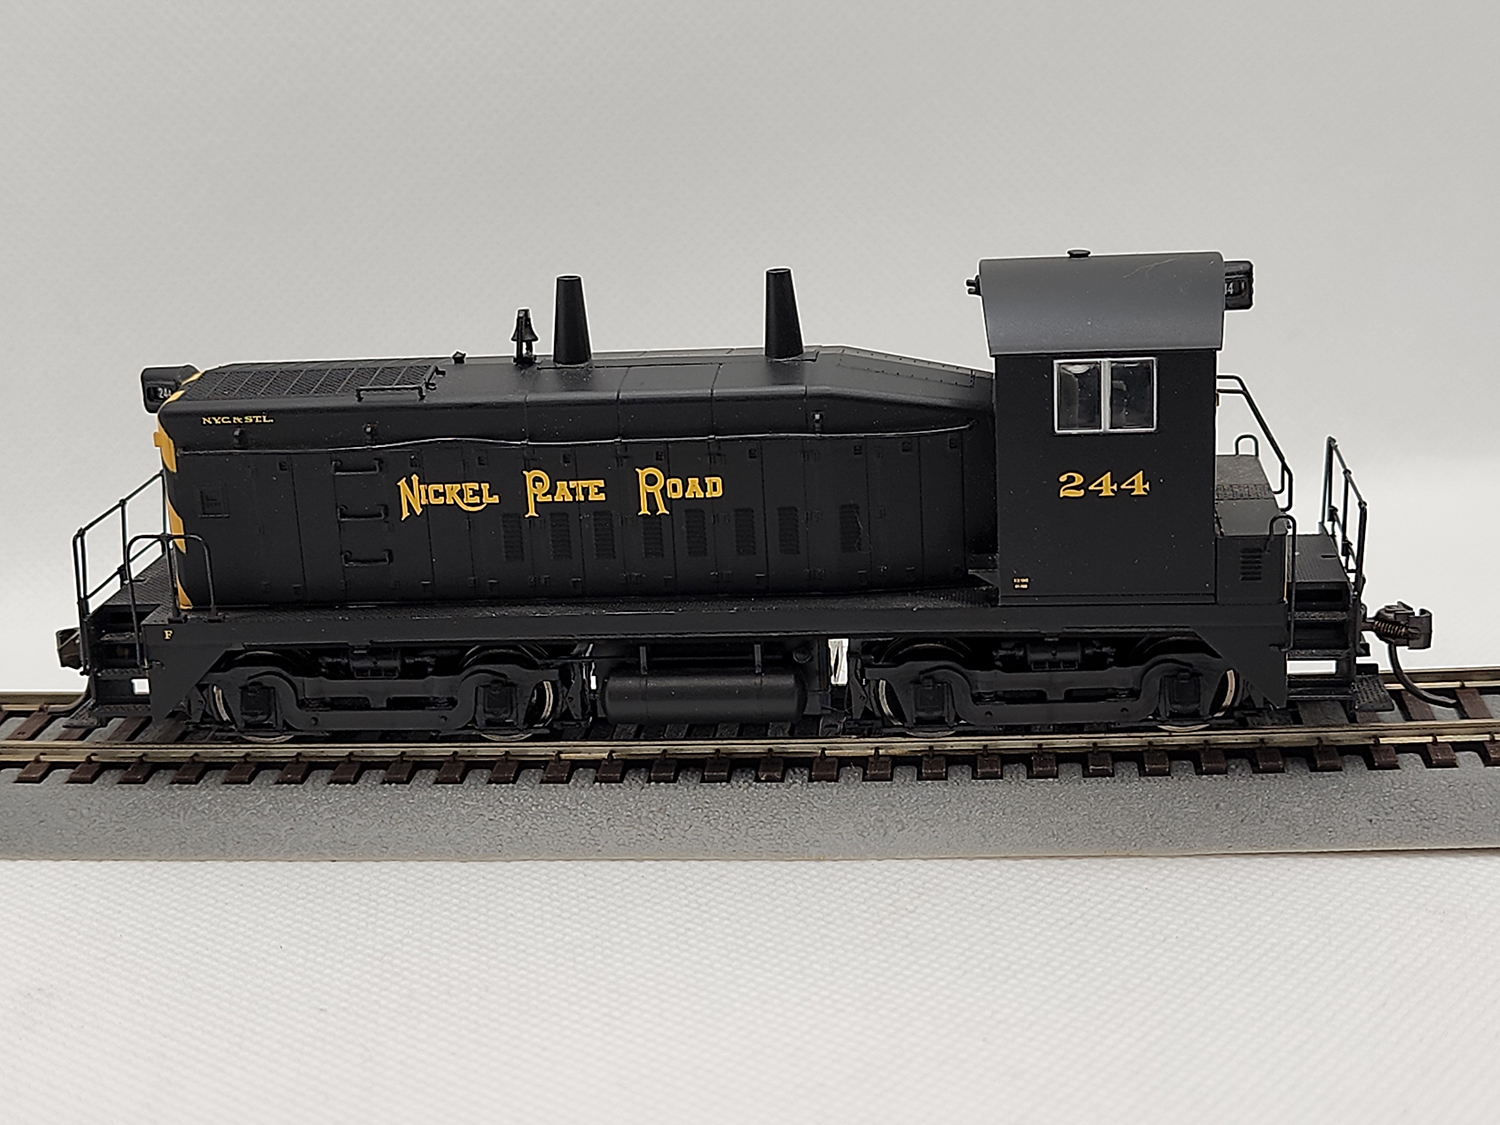 5th view of the Life-Like Nickel Plate Road SW9 Diesel Locomotive #244 in my HO-scale Collection